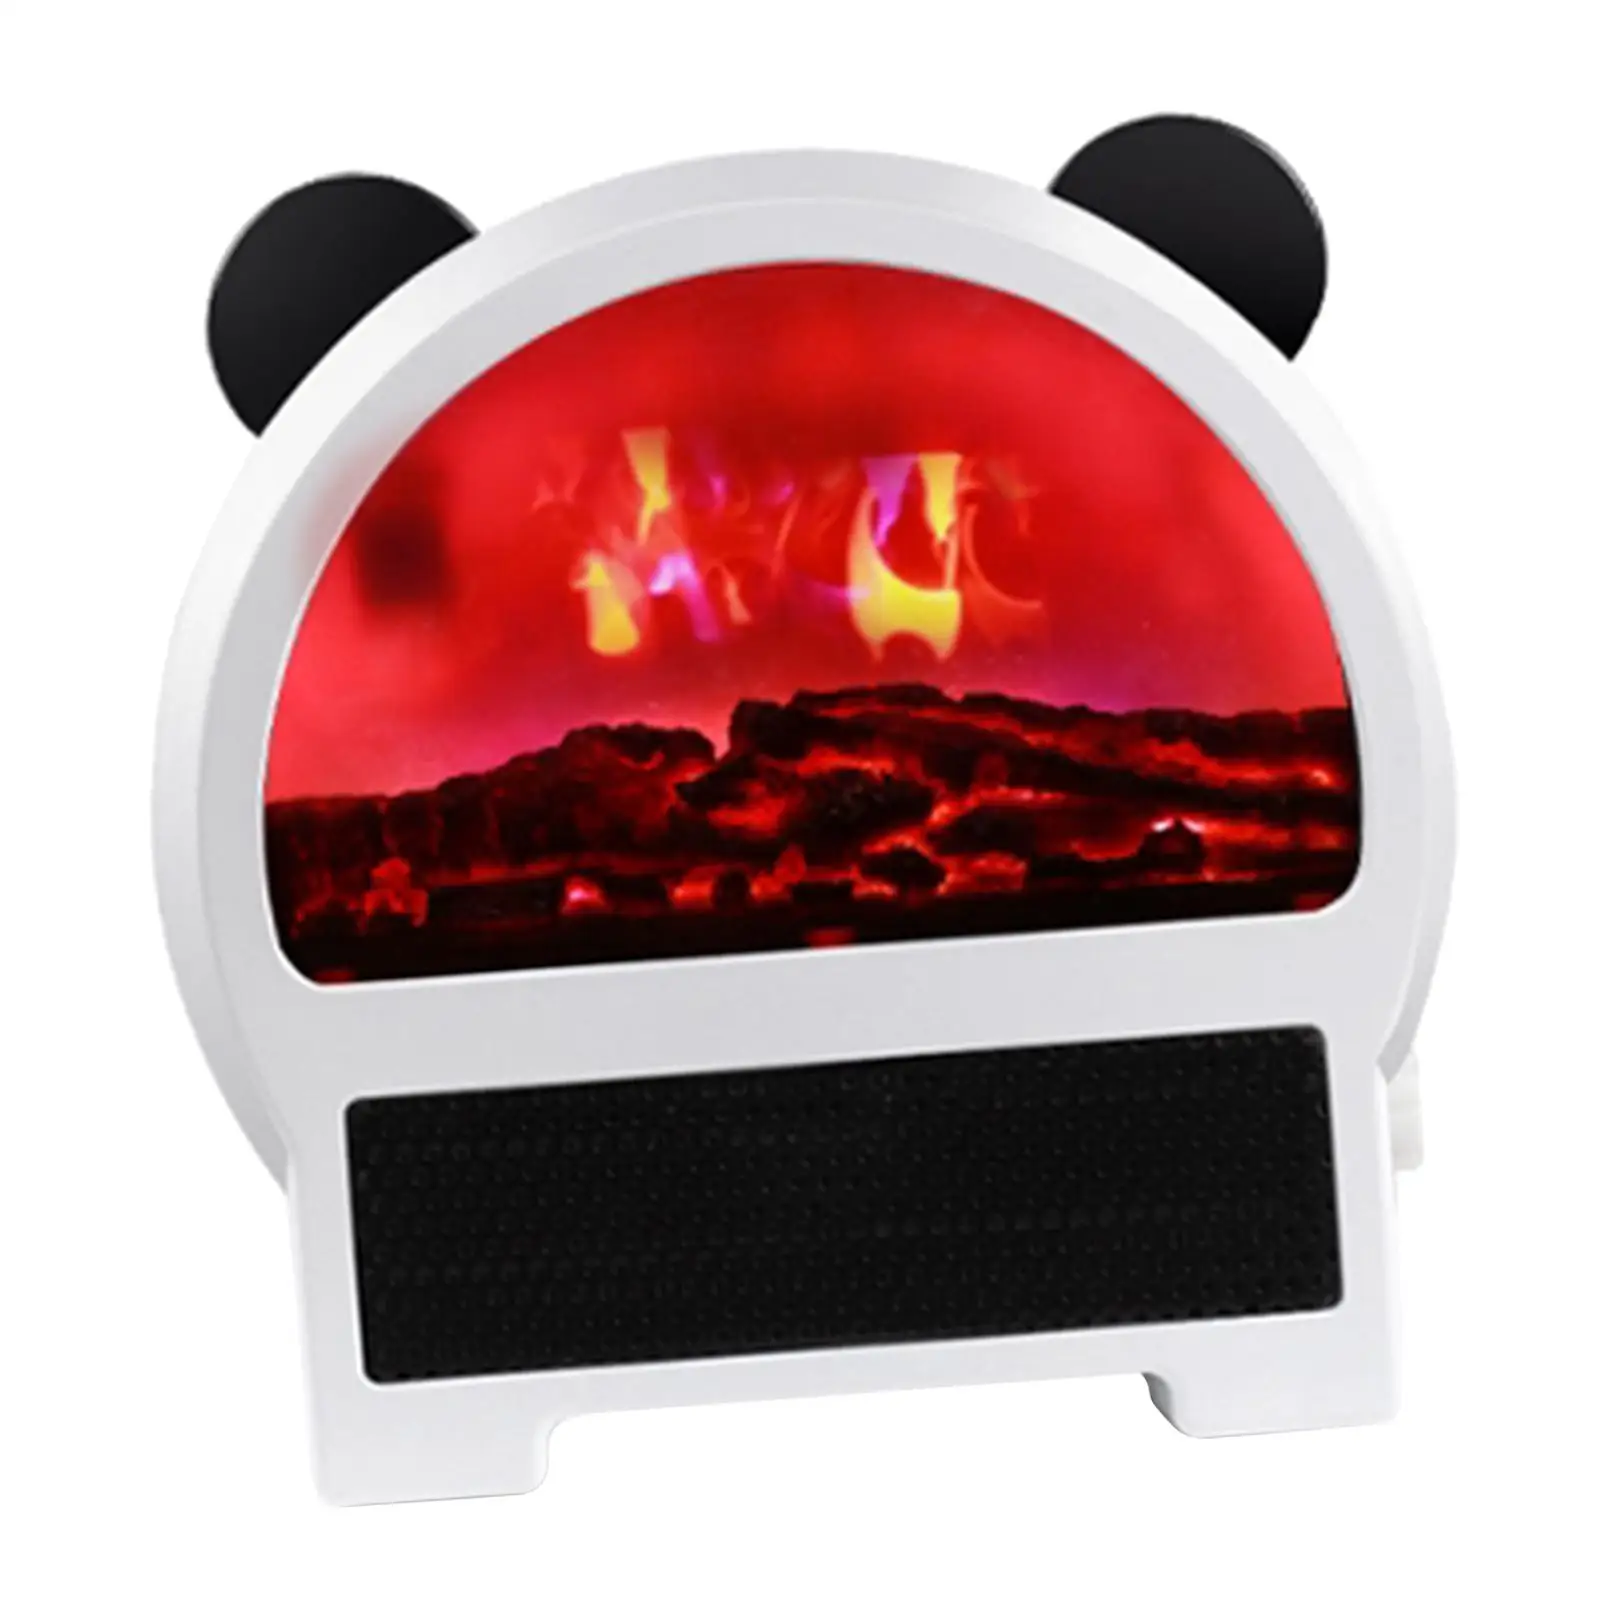 Portable Heater PTC Heater Cute Gifts Multipurpose Electric Air Warmer for Office Desk Tabletop Indoor Kitchen Dormitory